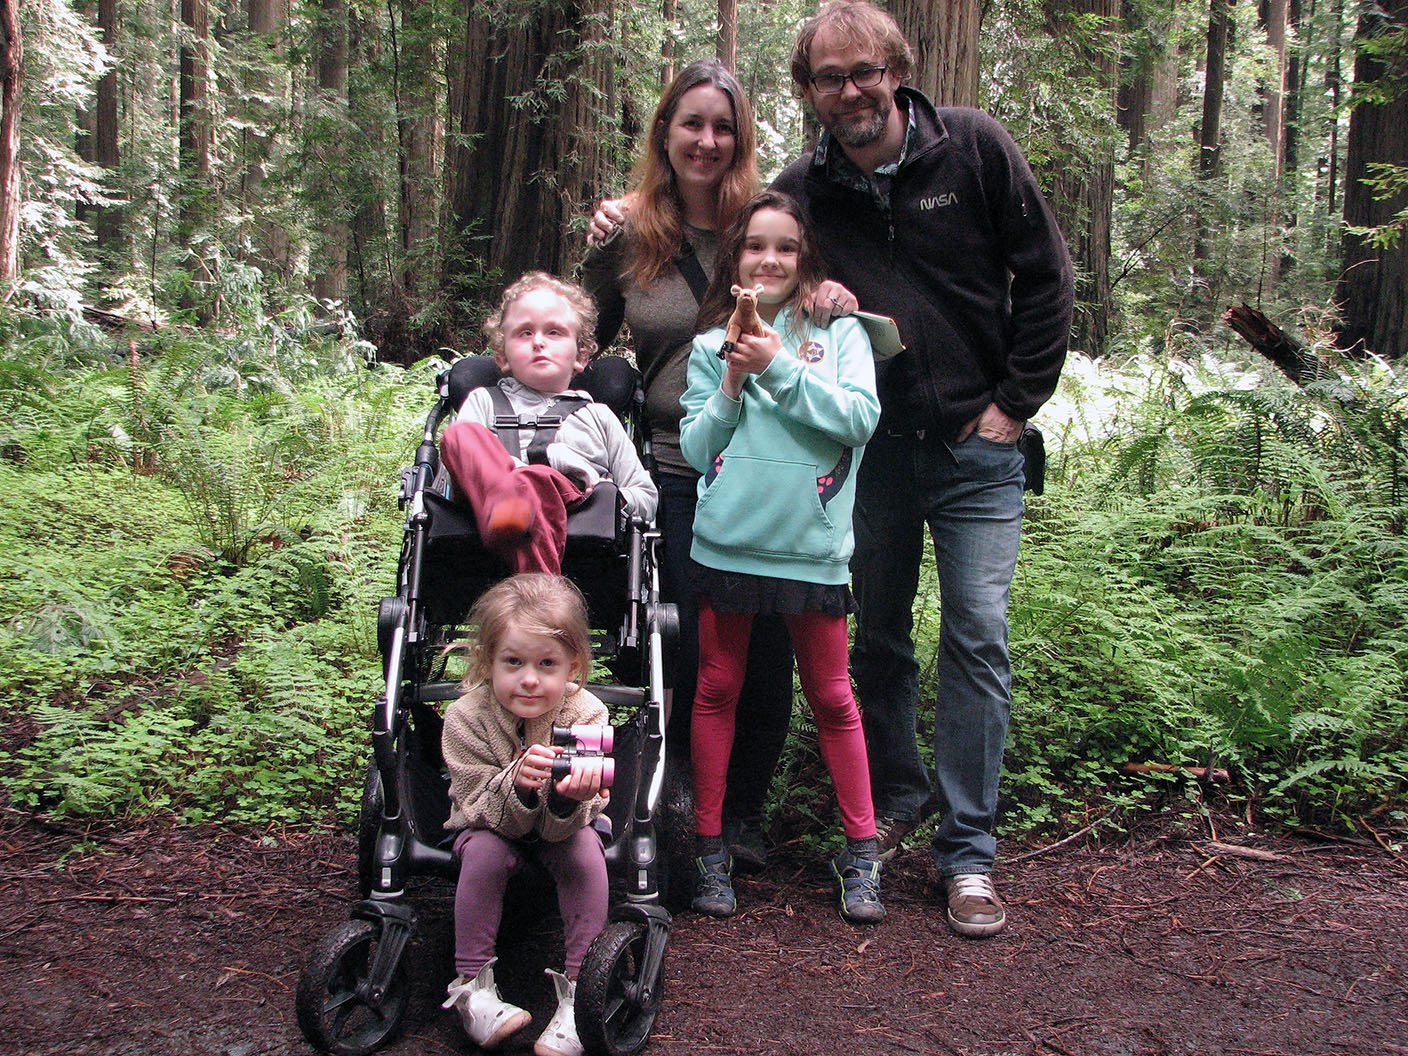 Family trip to the Redwoods